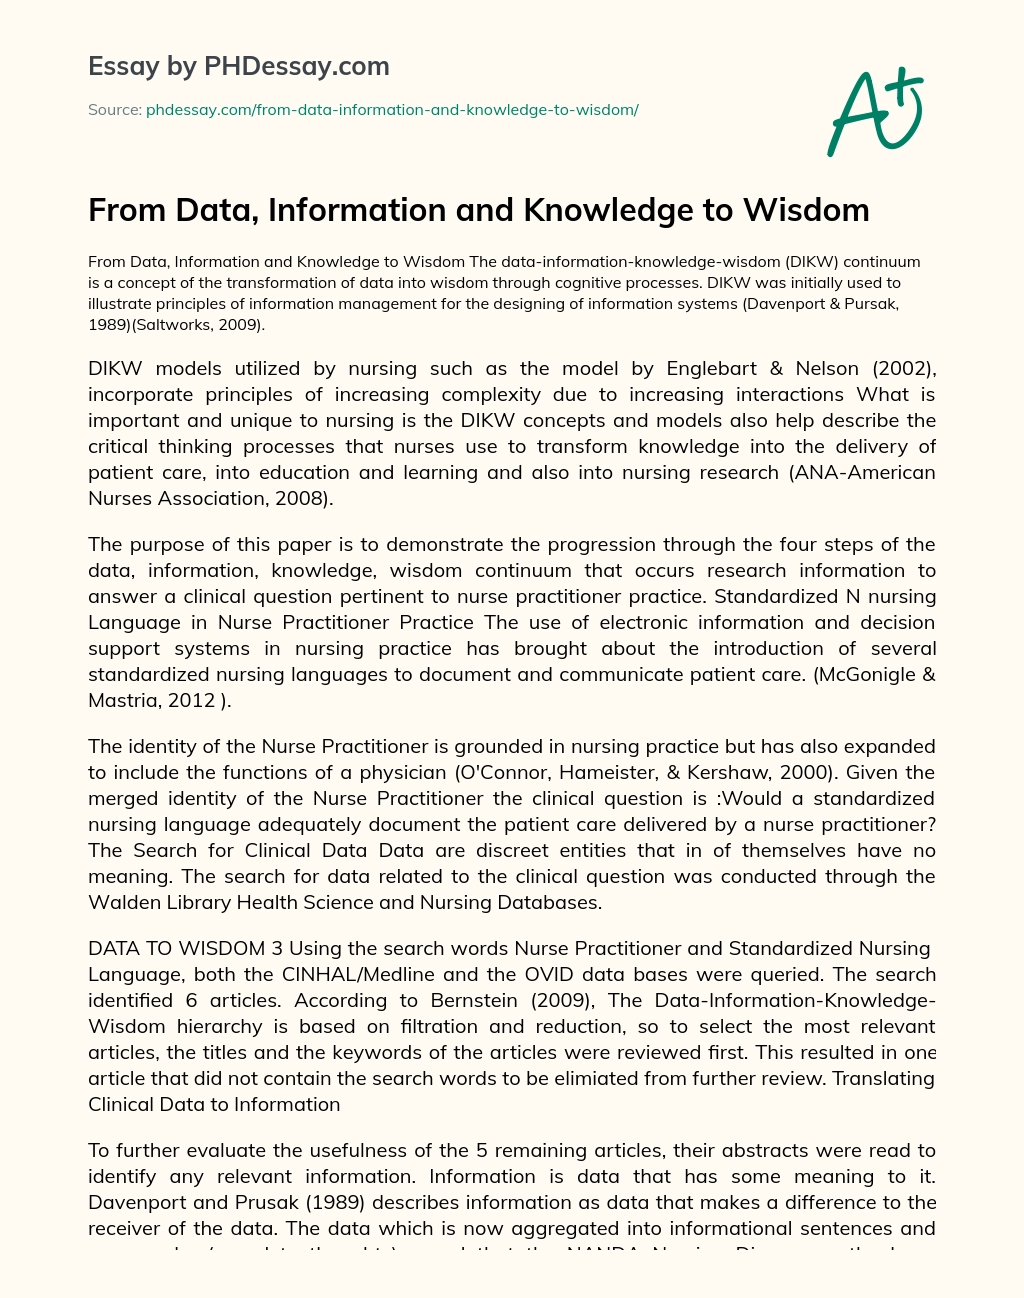 From Data, Information and Knowledge to Wisdom essay